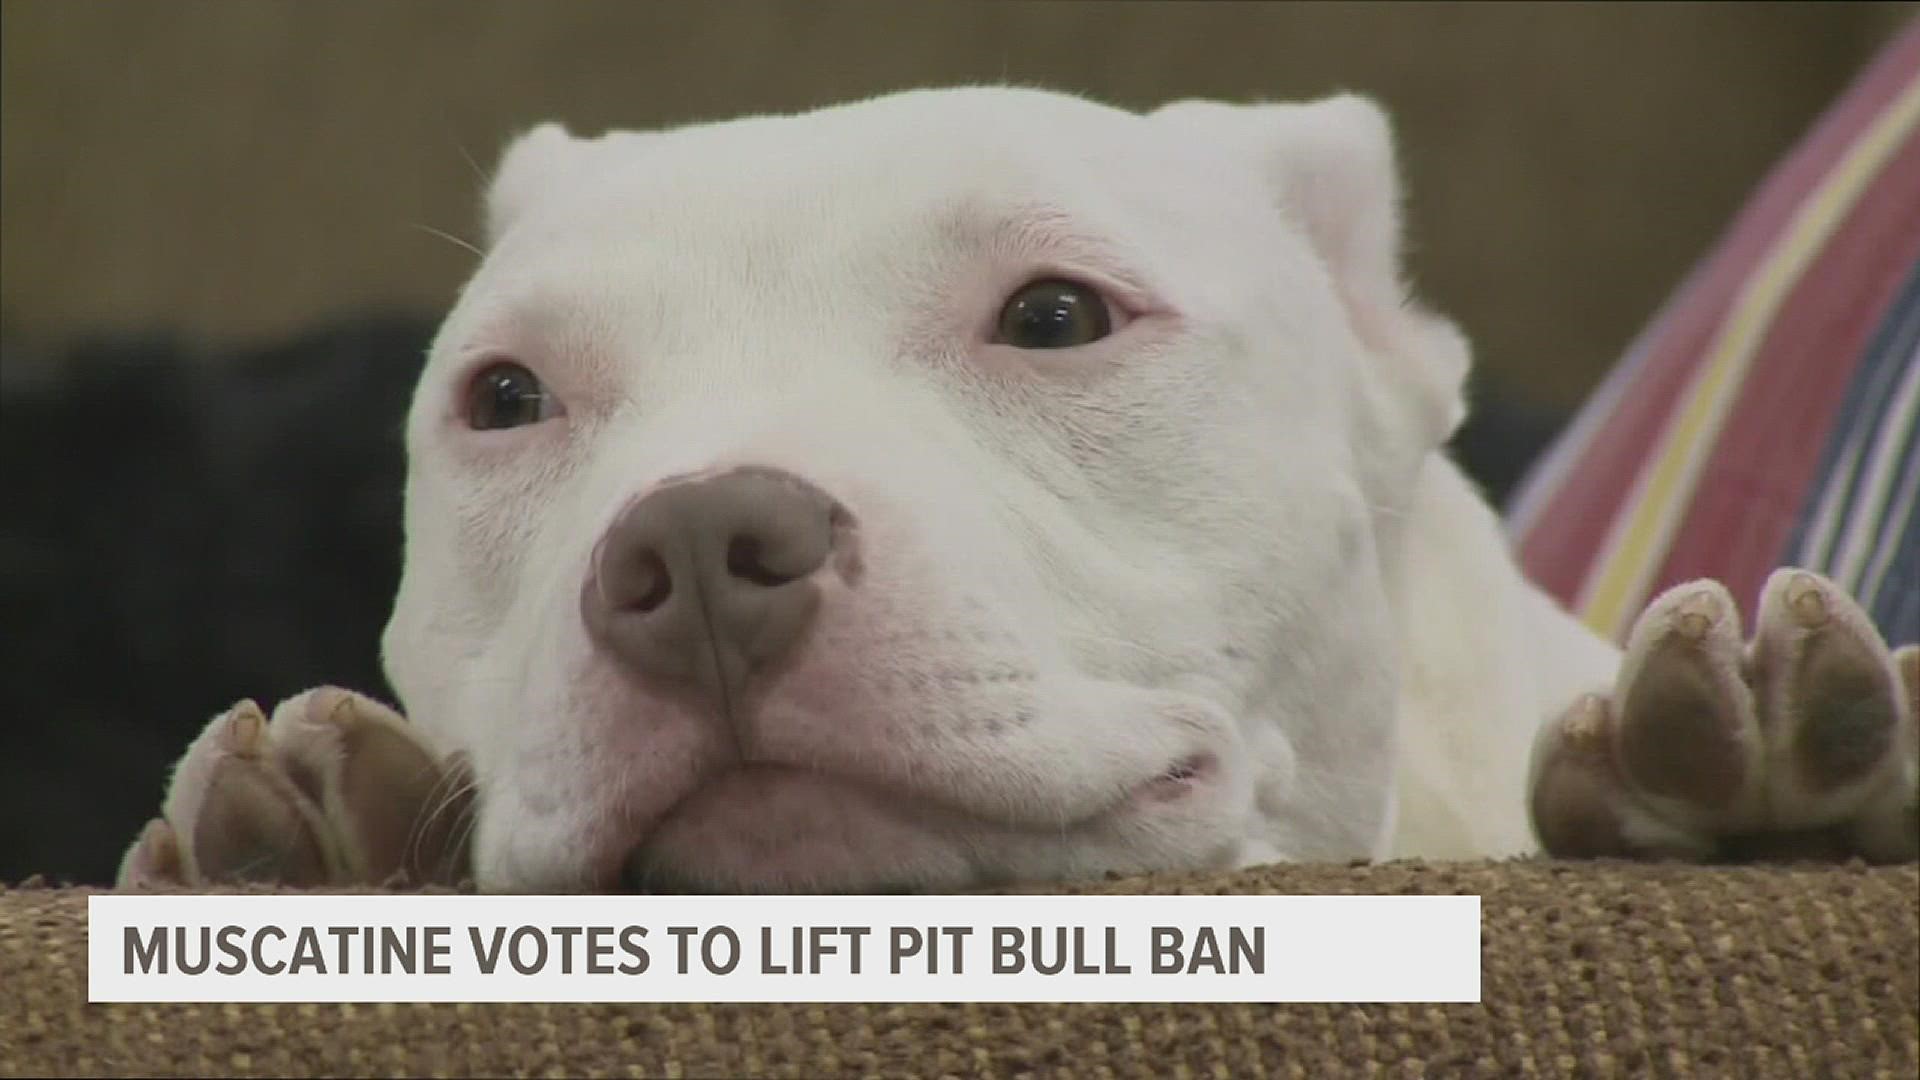 City council passed a 5-2 vote Thursday making it legal to own a pit bull in Muscatine.